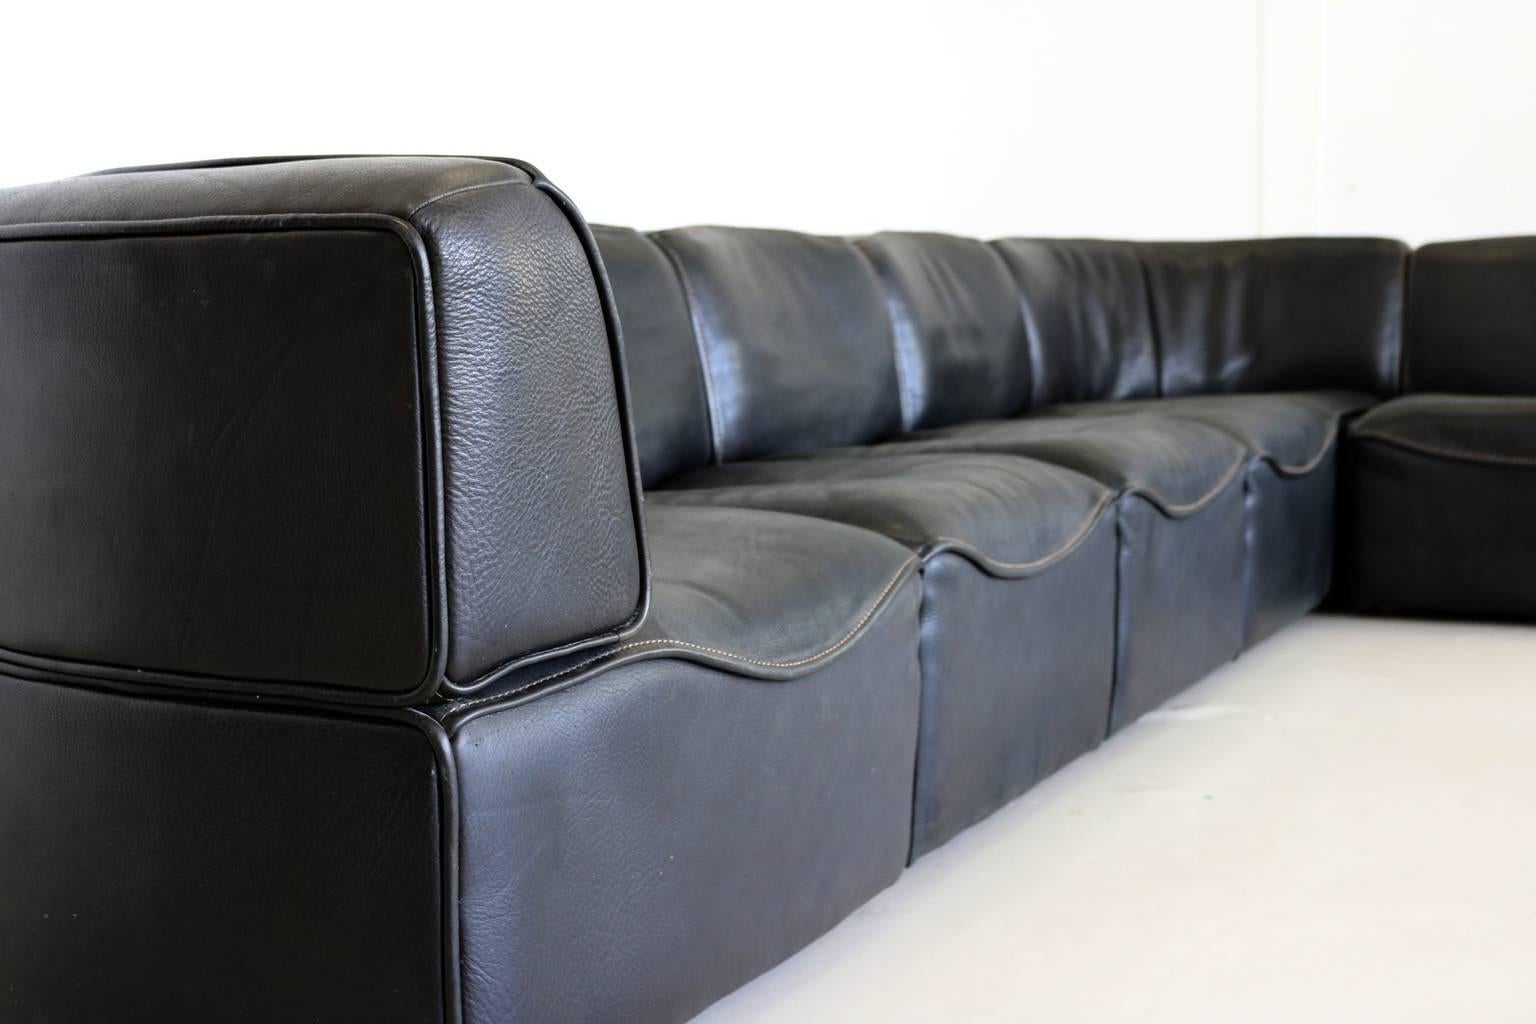 1970s top design living room set
Designed by the De Sede team
Thick black neck leather
Model: DS 15
Four straight modules and two corner modules
Corner module size: 80cm x 80 cm x 65 H.